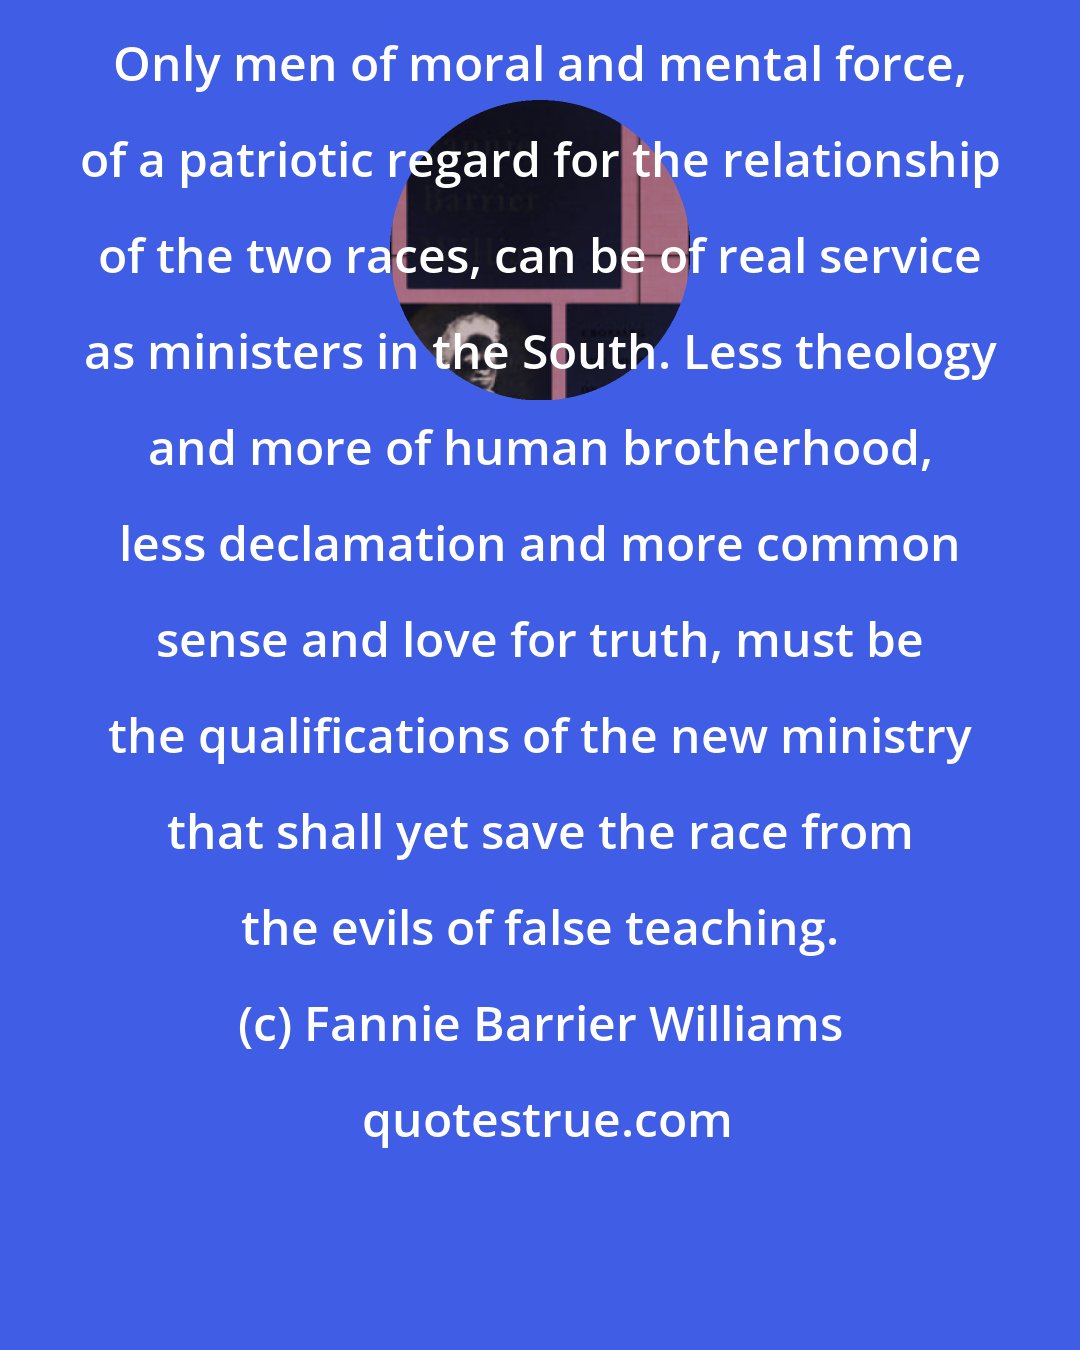 Fannie Barrier Williams: Only men of moral and mental force, of a patriotic regard for the relationship of the two races, can be of real service as ministers in the South. Less theology and more of human brotherhood, less declamation and more common sense and love for truth, must be the qualifications of the new ministry that shall yet save the race from the evils of false teaching.